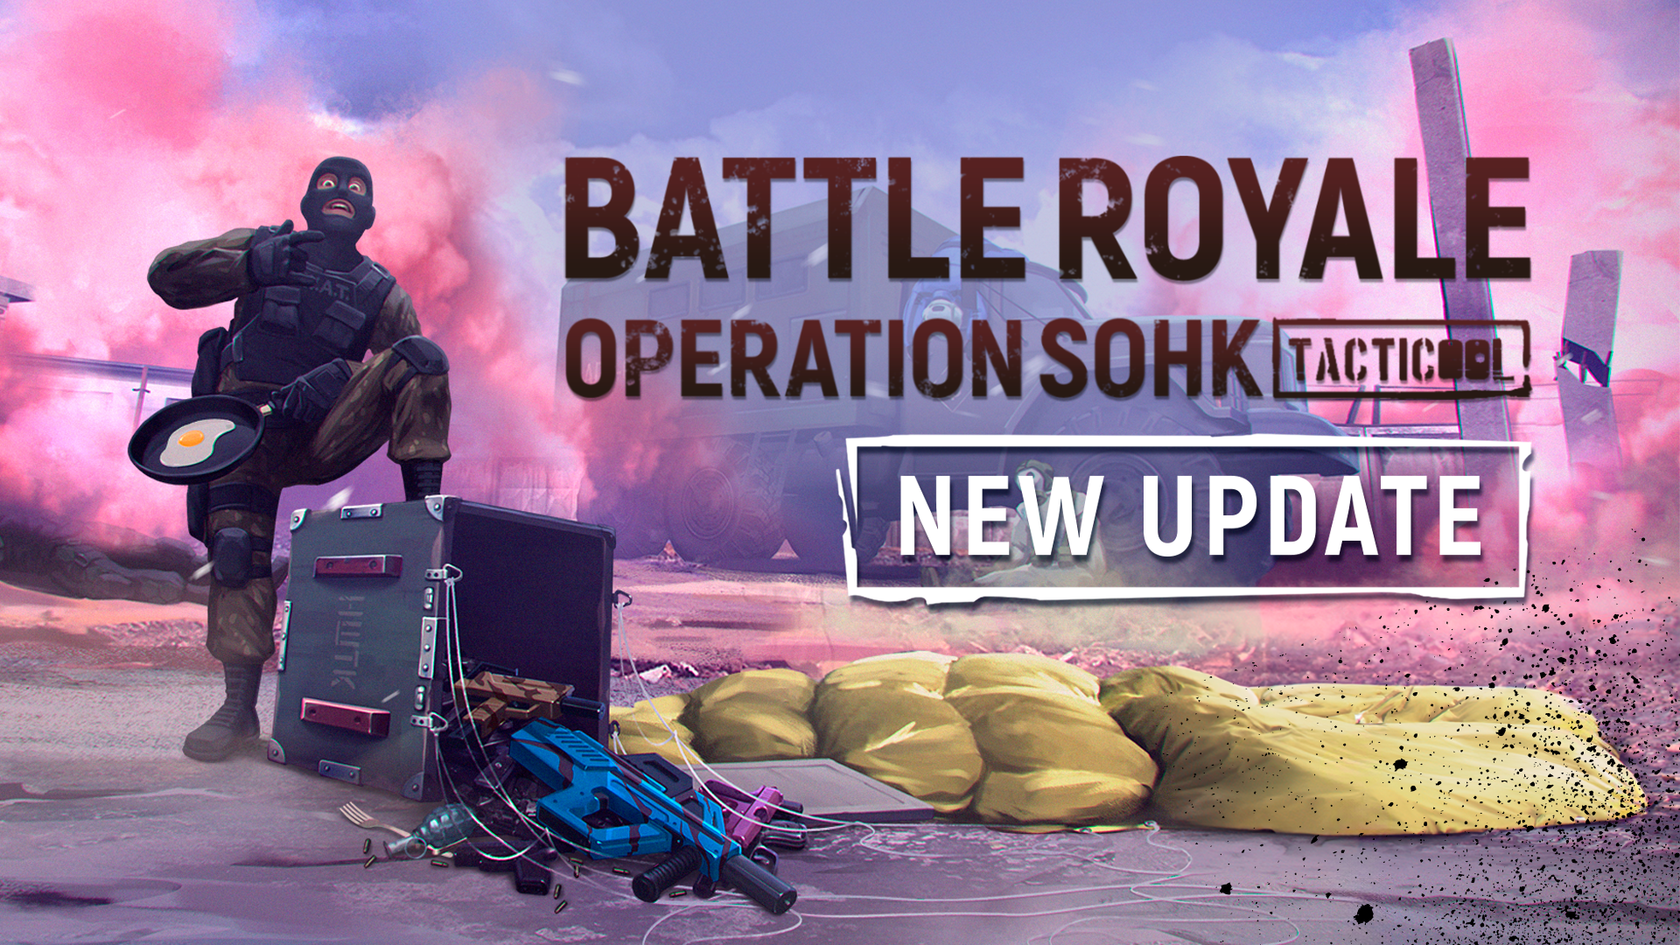 NEW UPDATE: OPERATION S.O.H.K.